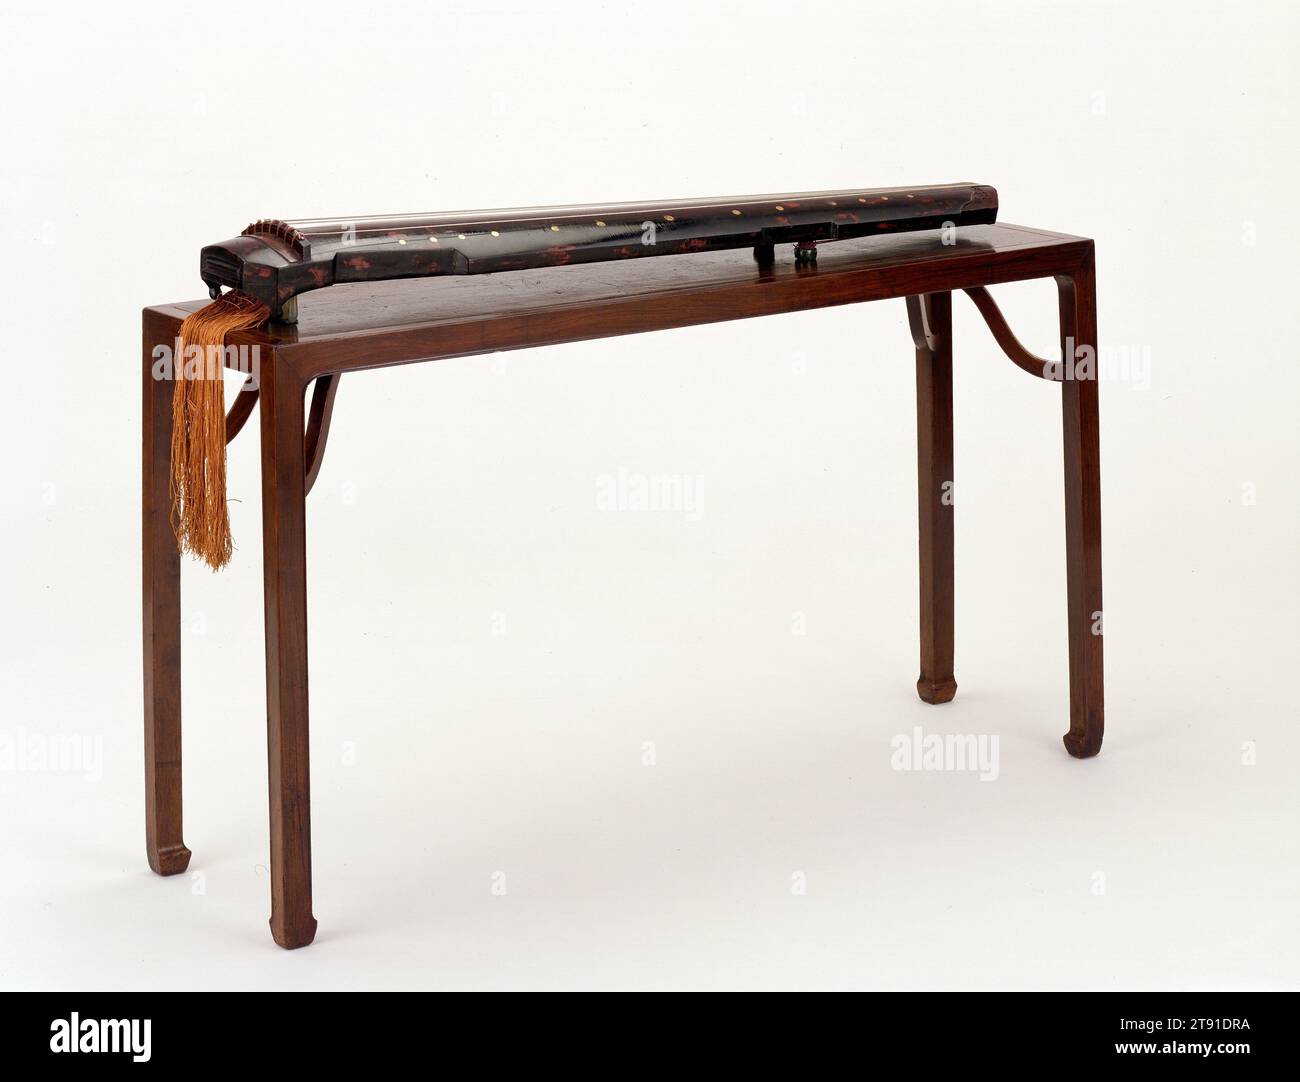 Zither (Qin), 1634 (dated by inscription), 47 x 7 x 3 1/2 in. (119.38 x 17.78 x 8.89 cm), Black and red lacquered wood with jade thumb screws, China, 17th century, The zither, or qin, has been regarded as a symbol of enlightenment by the Chinese since Confucian times (6th century BCE). By the seventeenth century, it was a required object in most scholars' studies, if only for display. This rare example has inscriptions on the bottom, including the title Zhong He ('middle harmony') and the number 57. Stock Photo